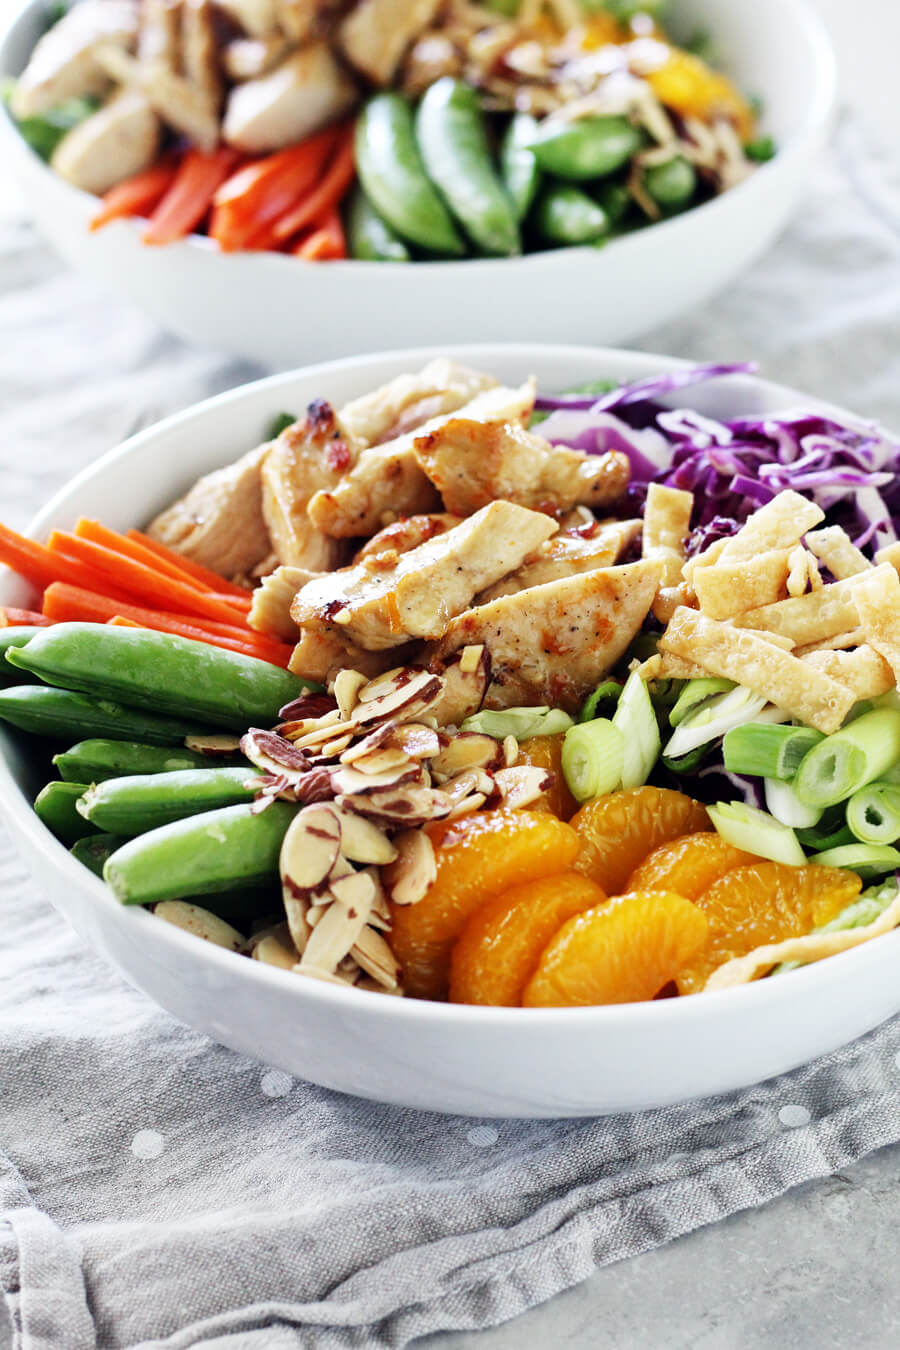 Whether you're entertaining guests or having a date night dinner in, this Chinese Chicken Mandarin Salad Bowl is perfect. Full of savory Chinese flavors, this cheap healthy meal is a quick weeknight dinner solution and delicious to boot!